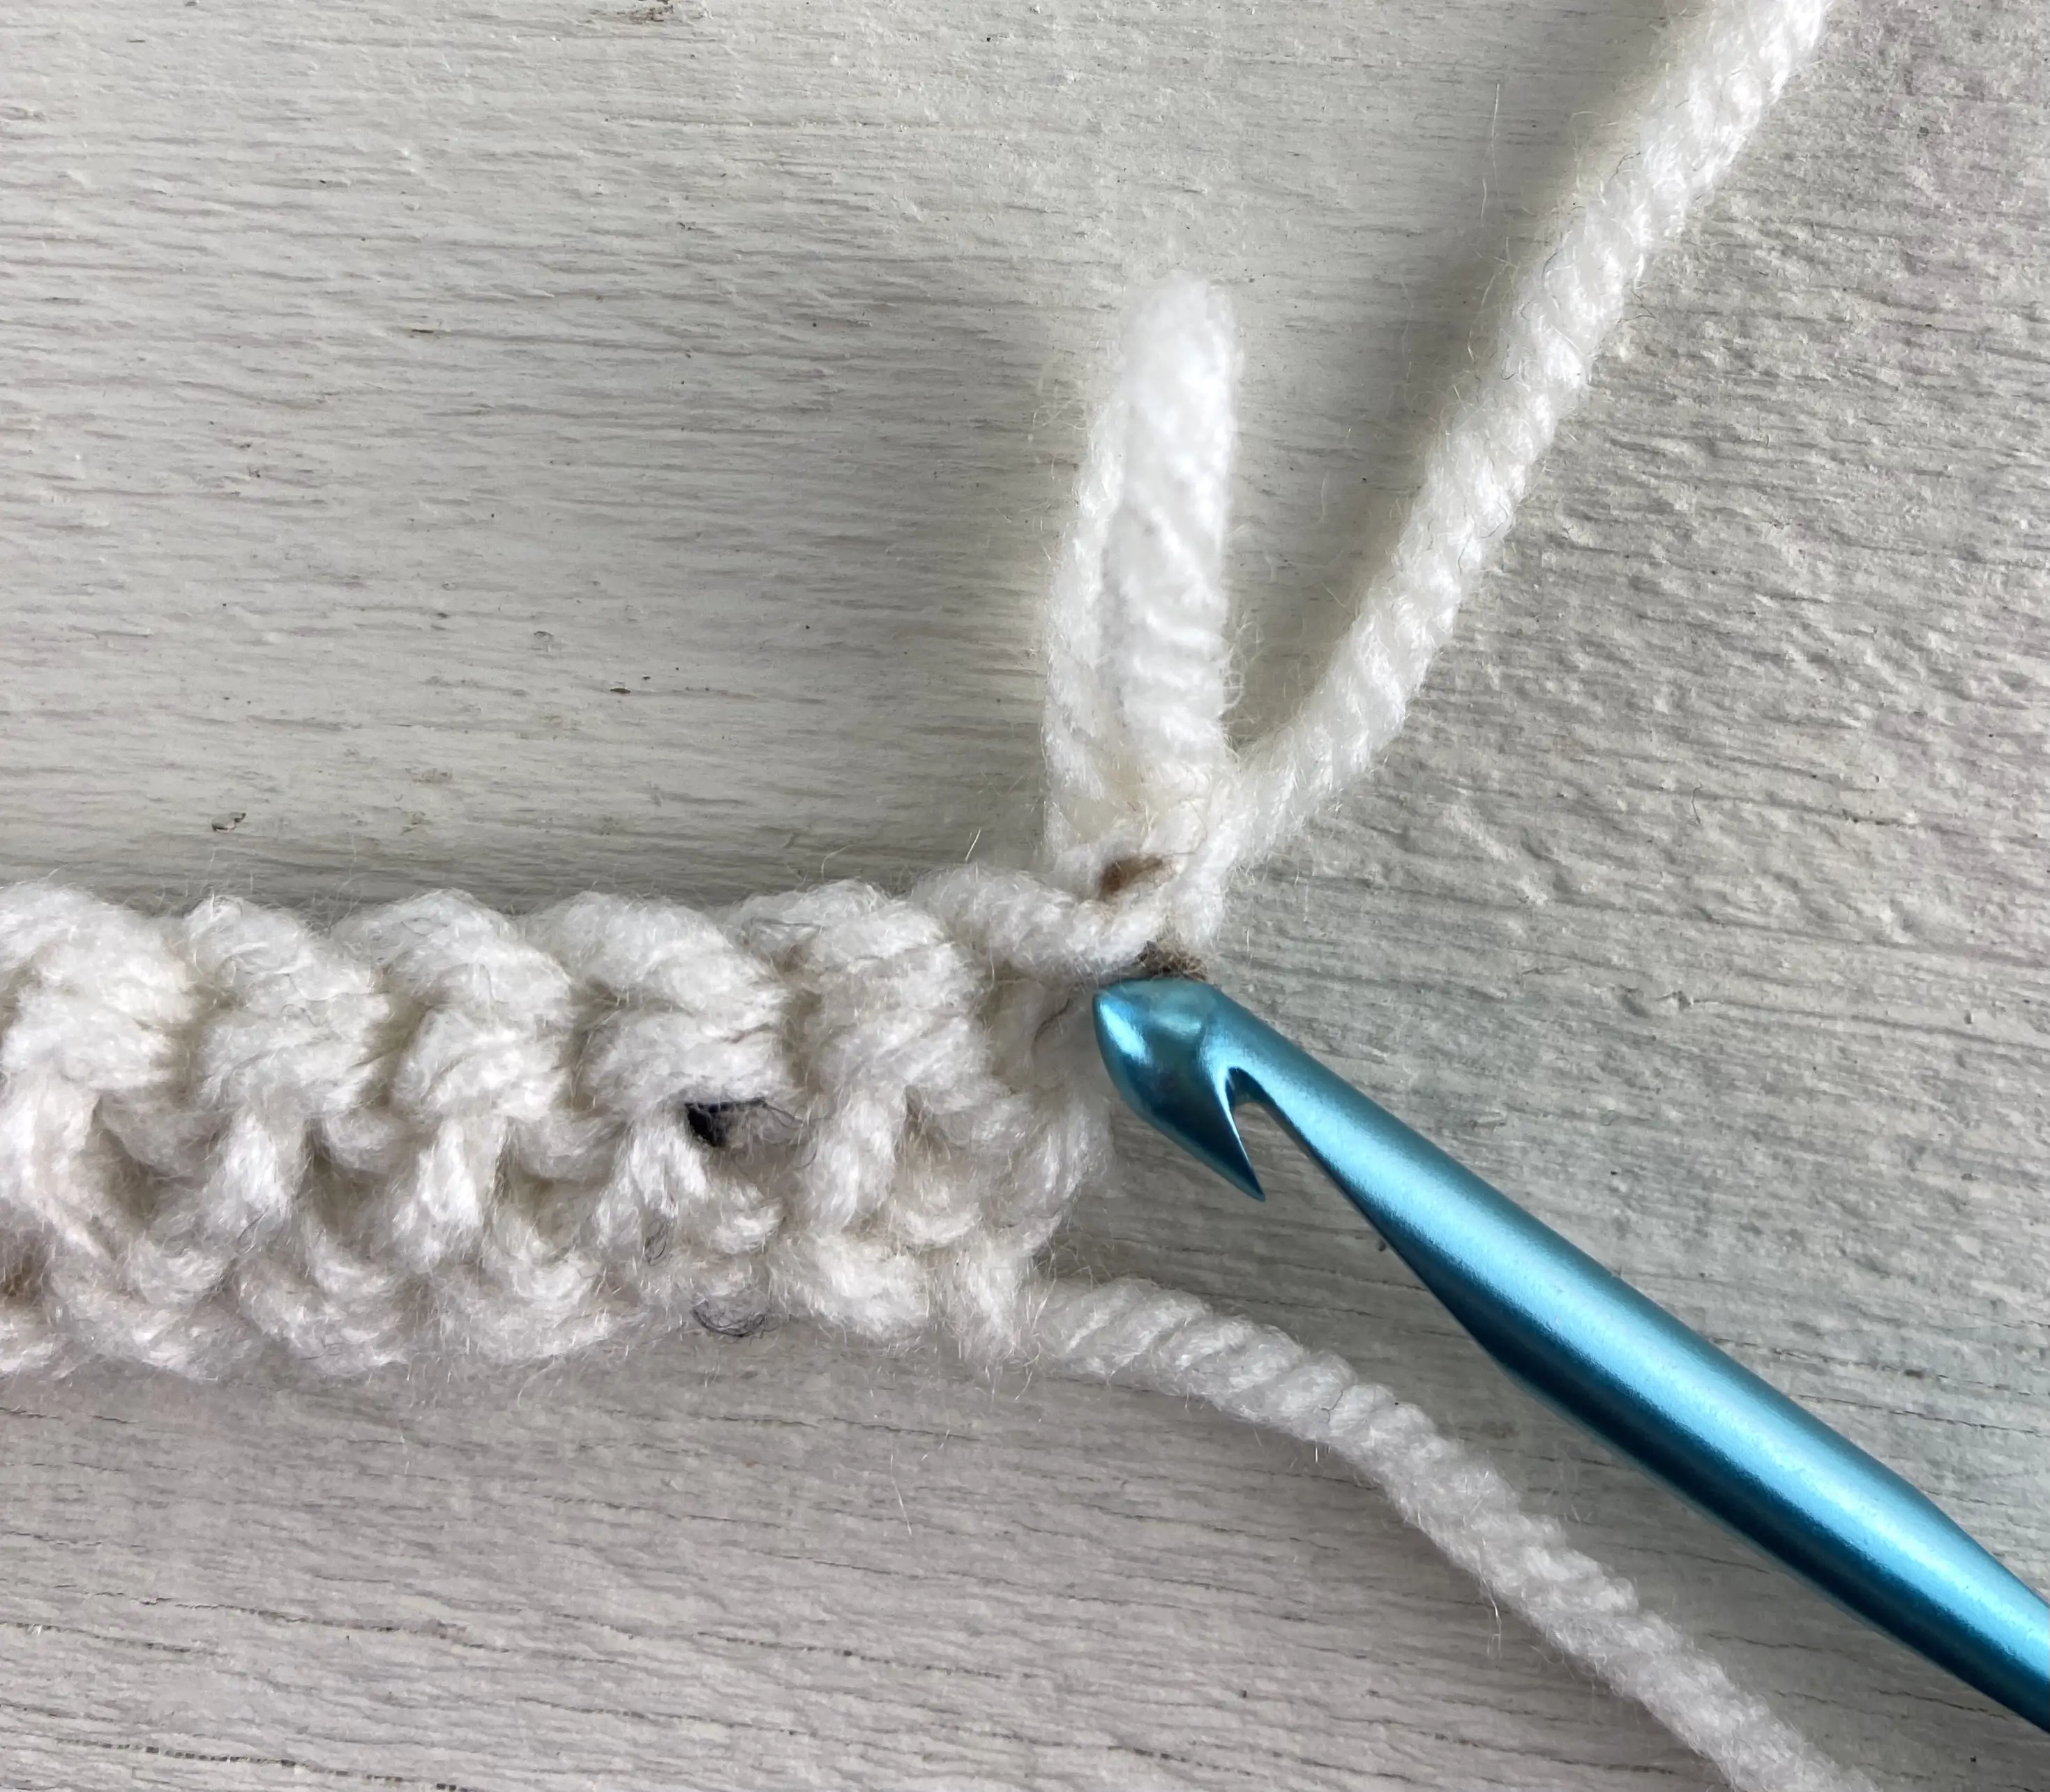 Ch 1 does NOT count as a stitch, so your first hhdc goes here.